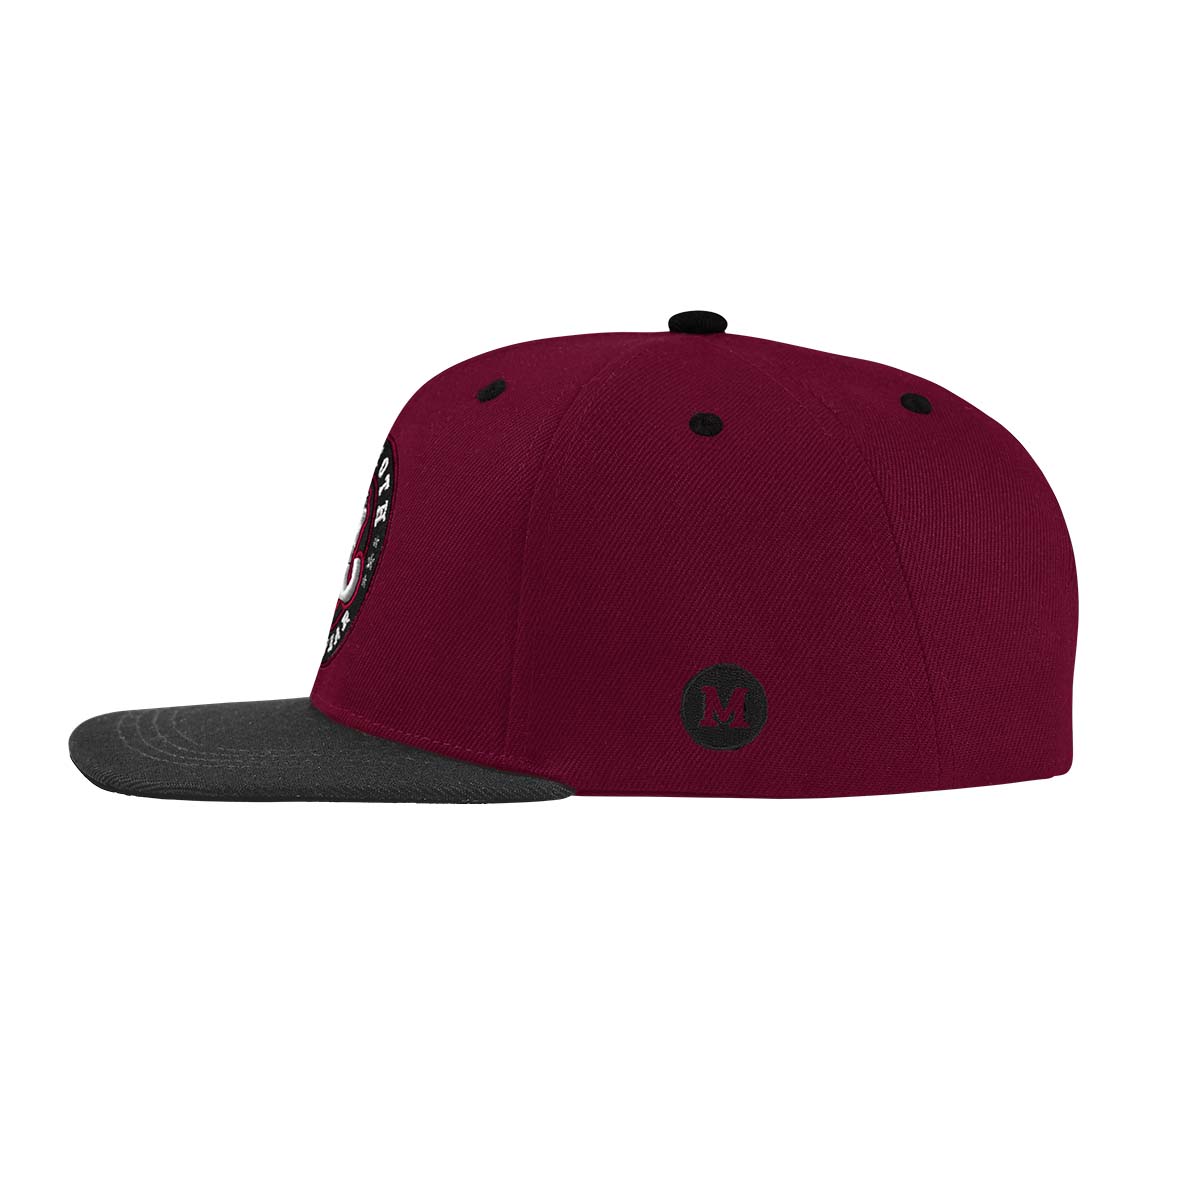 CLASSIC SNAPBACK - MAROON - Side View